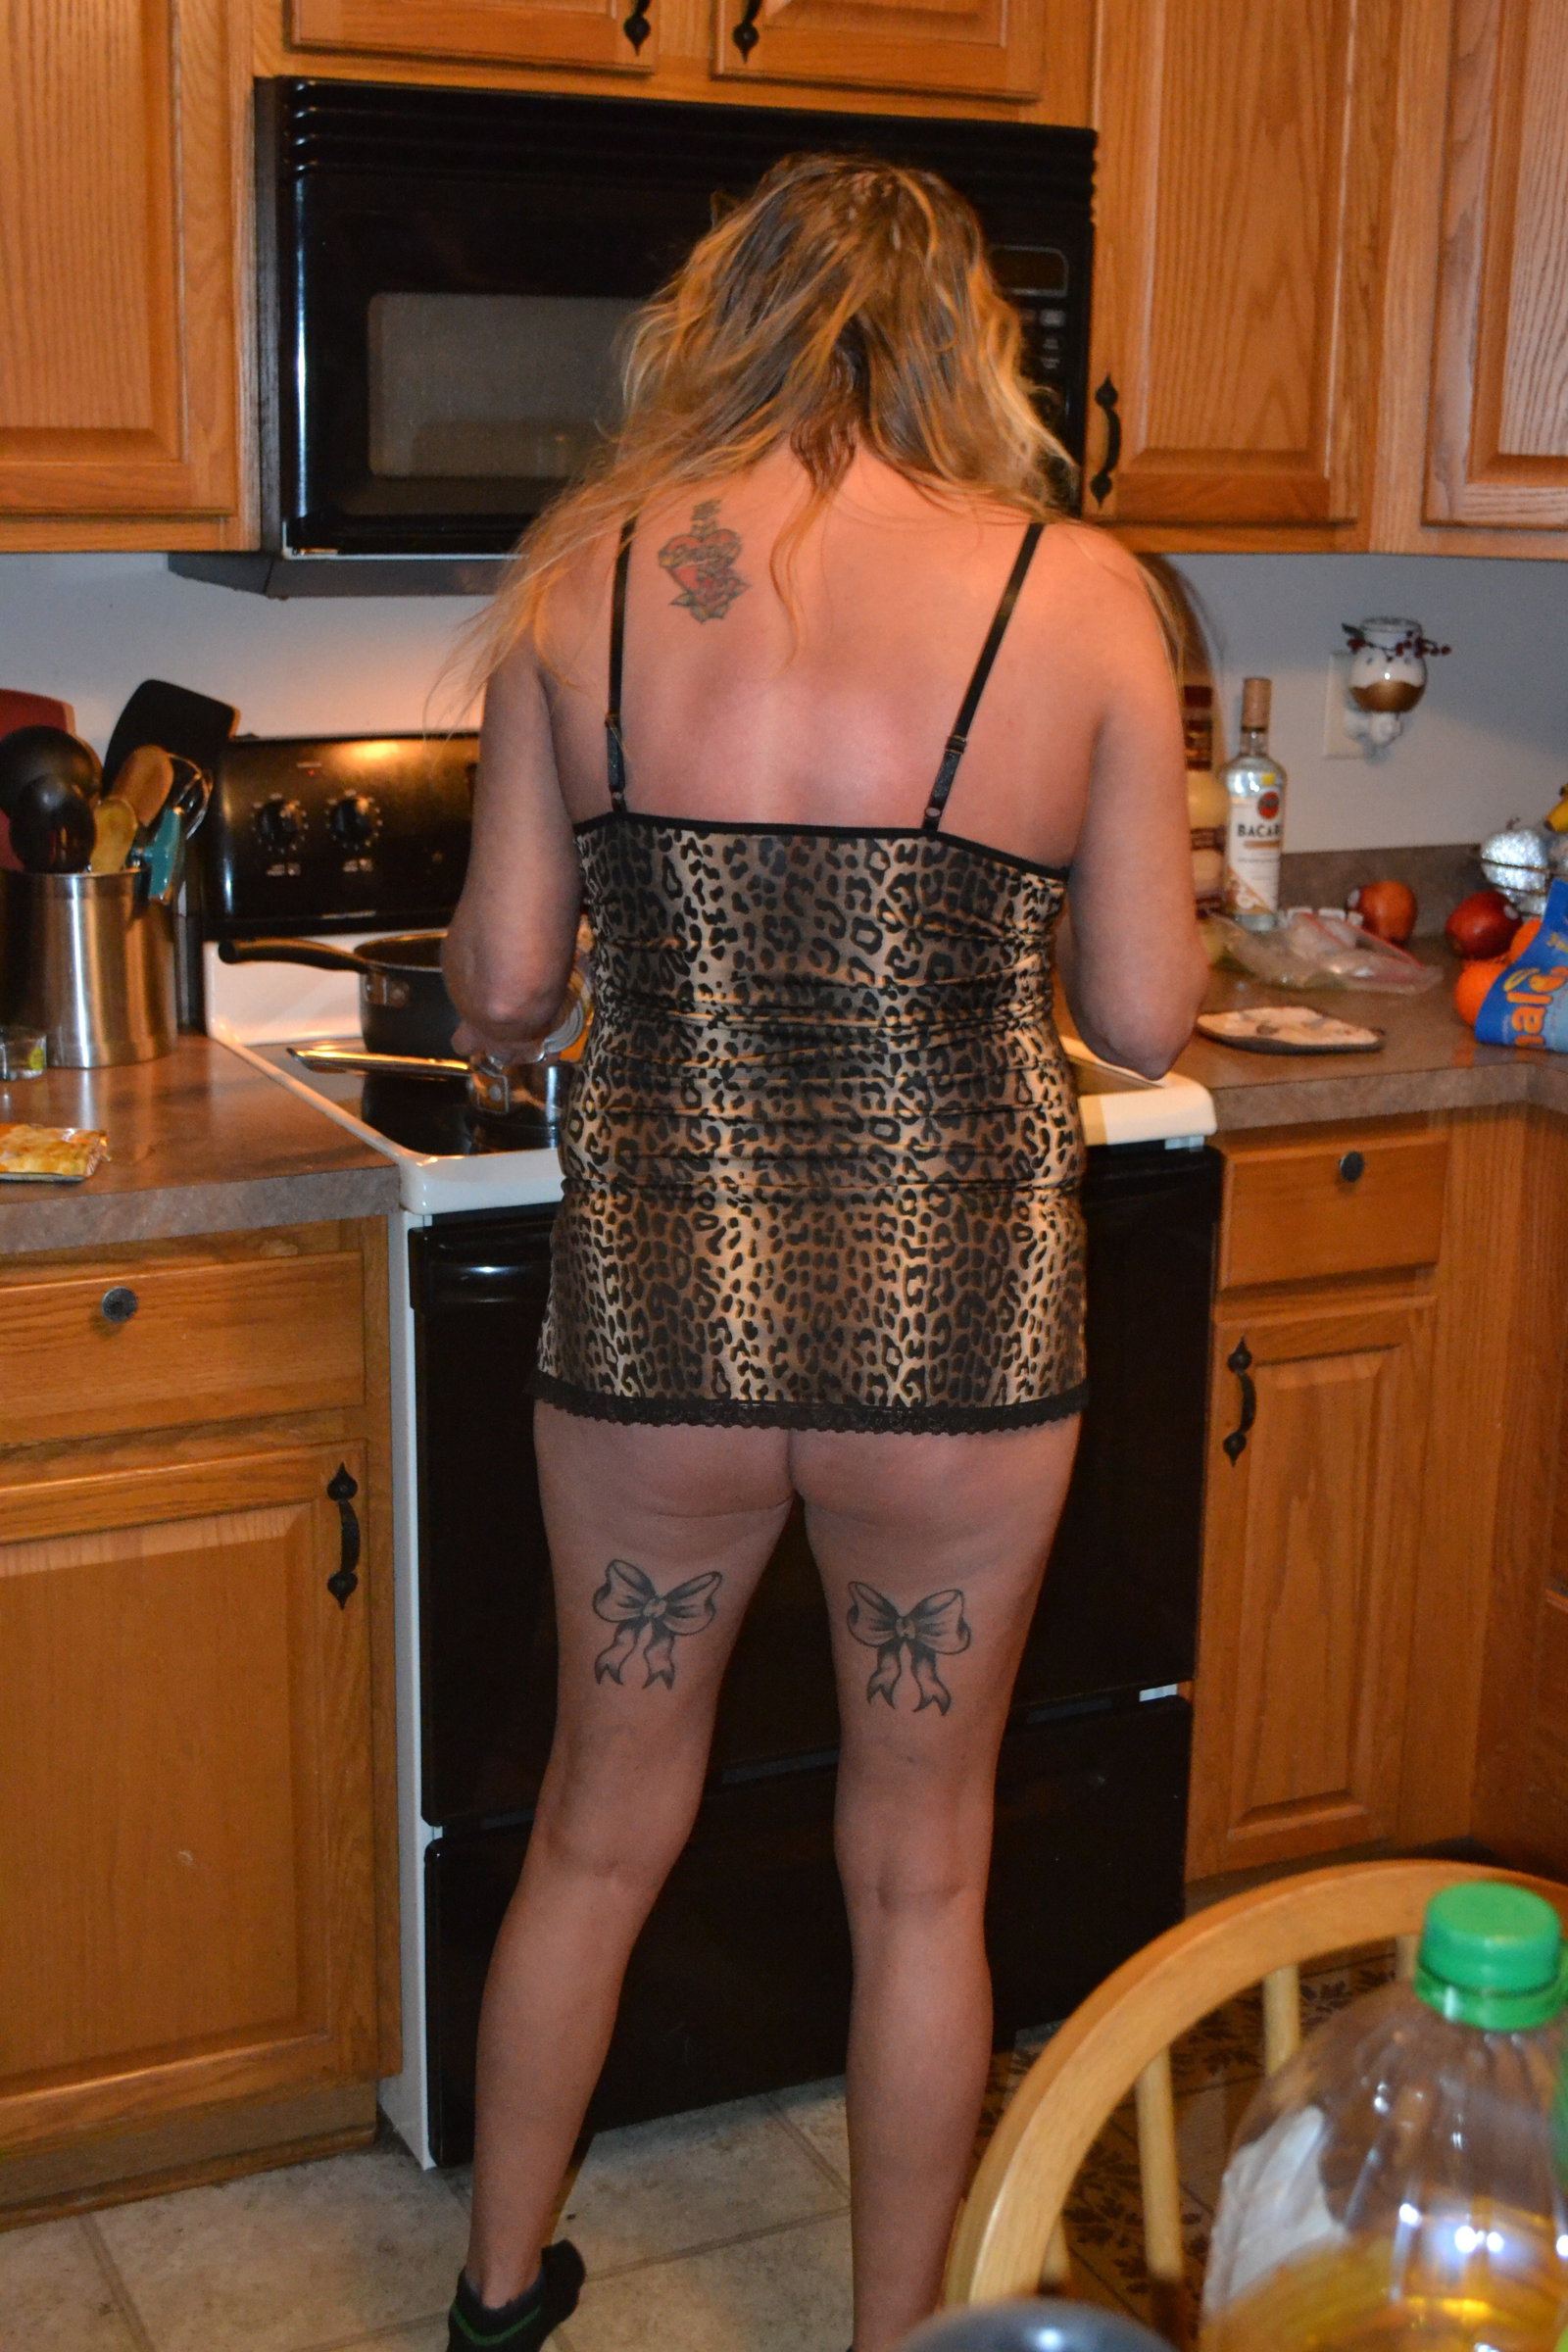 Photo by BlondeMary with the username @BlondeMary,  April 29, 2020 at 7:59 PM. The post is about the topic Exposed Wife and the text says 'Ready for a lot of big cock #slutwife #blondemary #hotwife #sharedwife #wifewantscock'